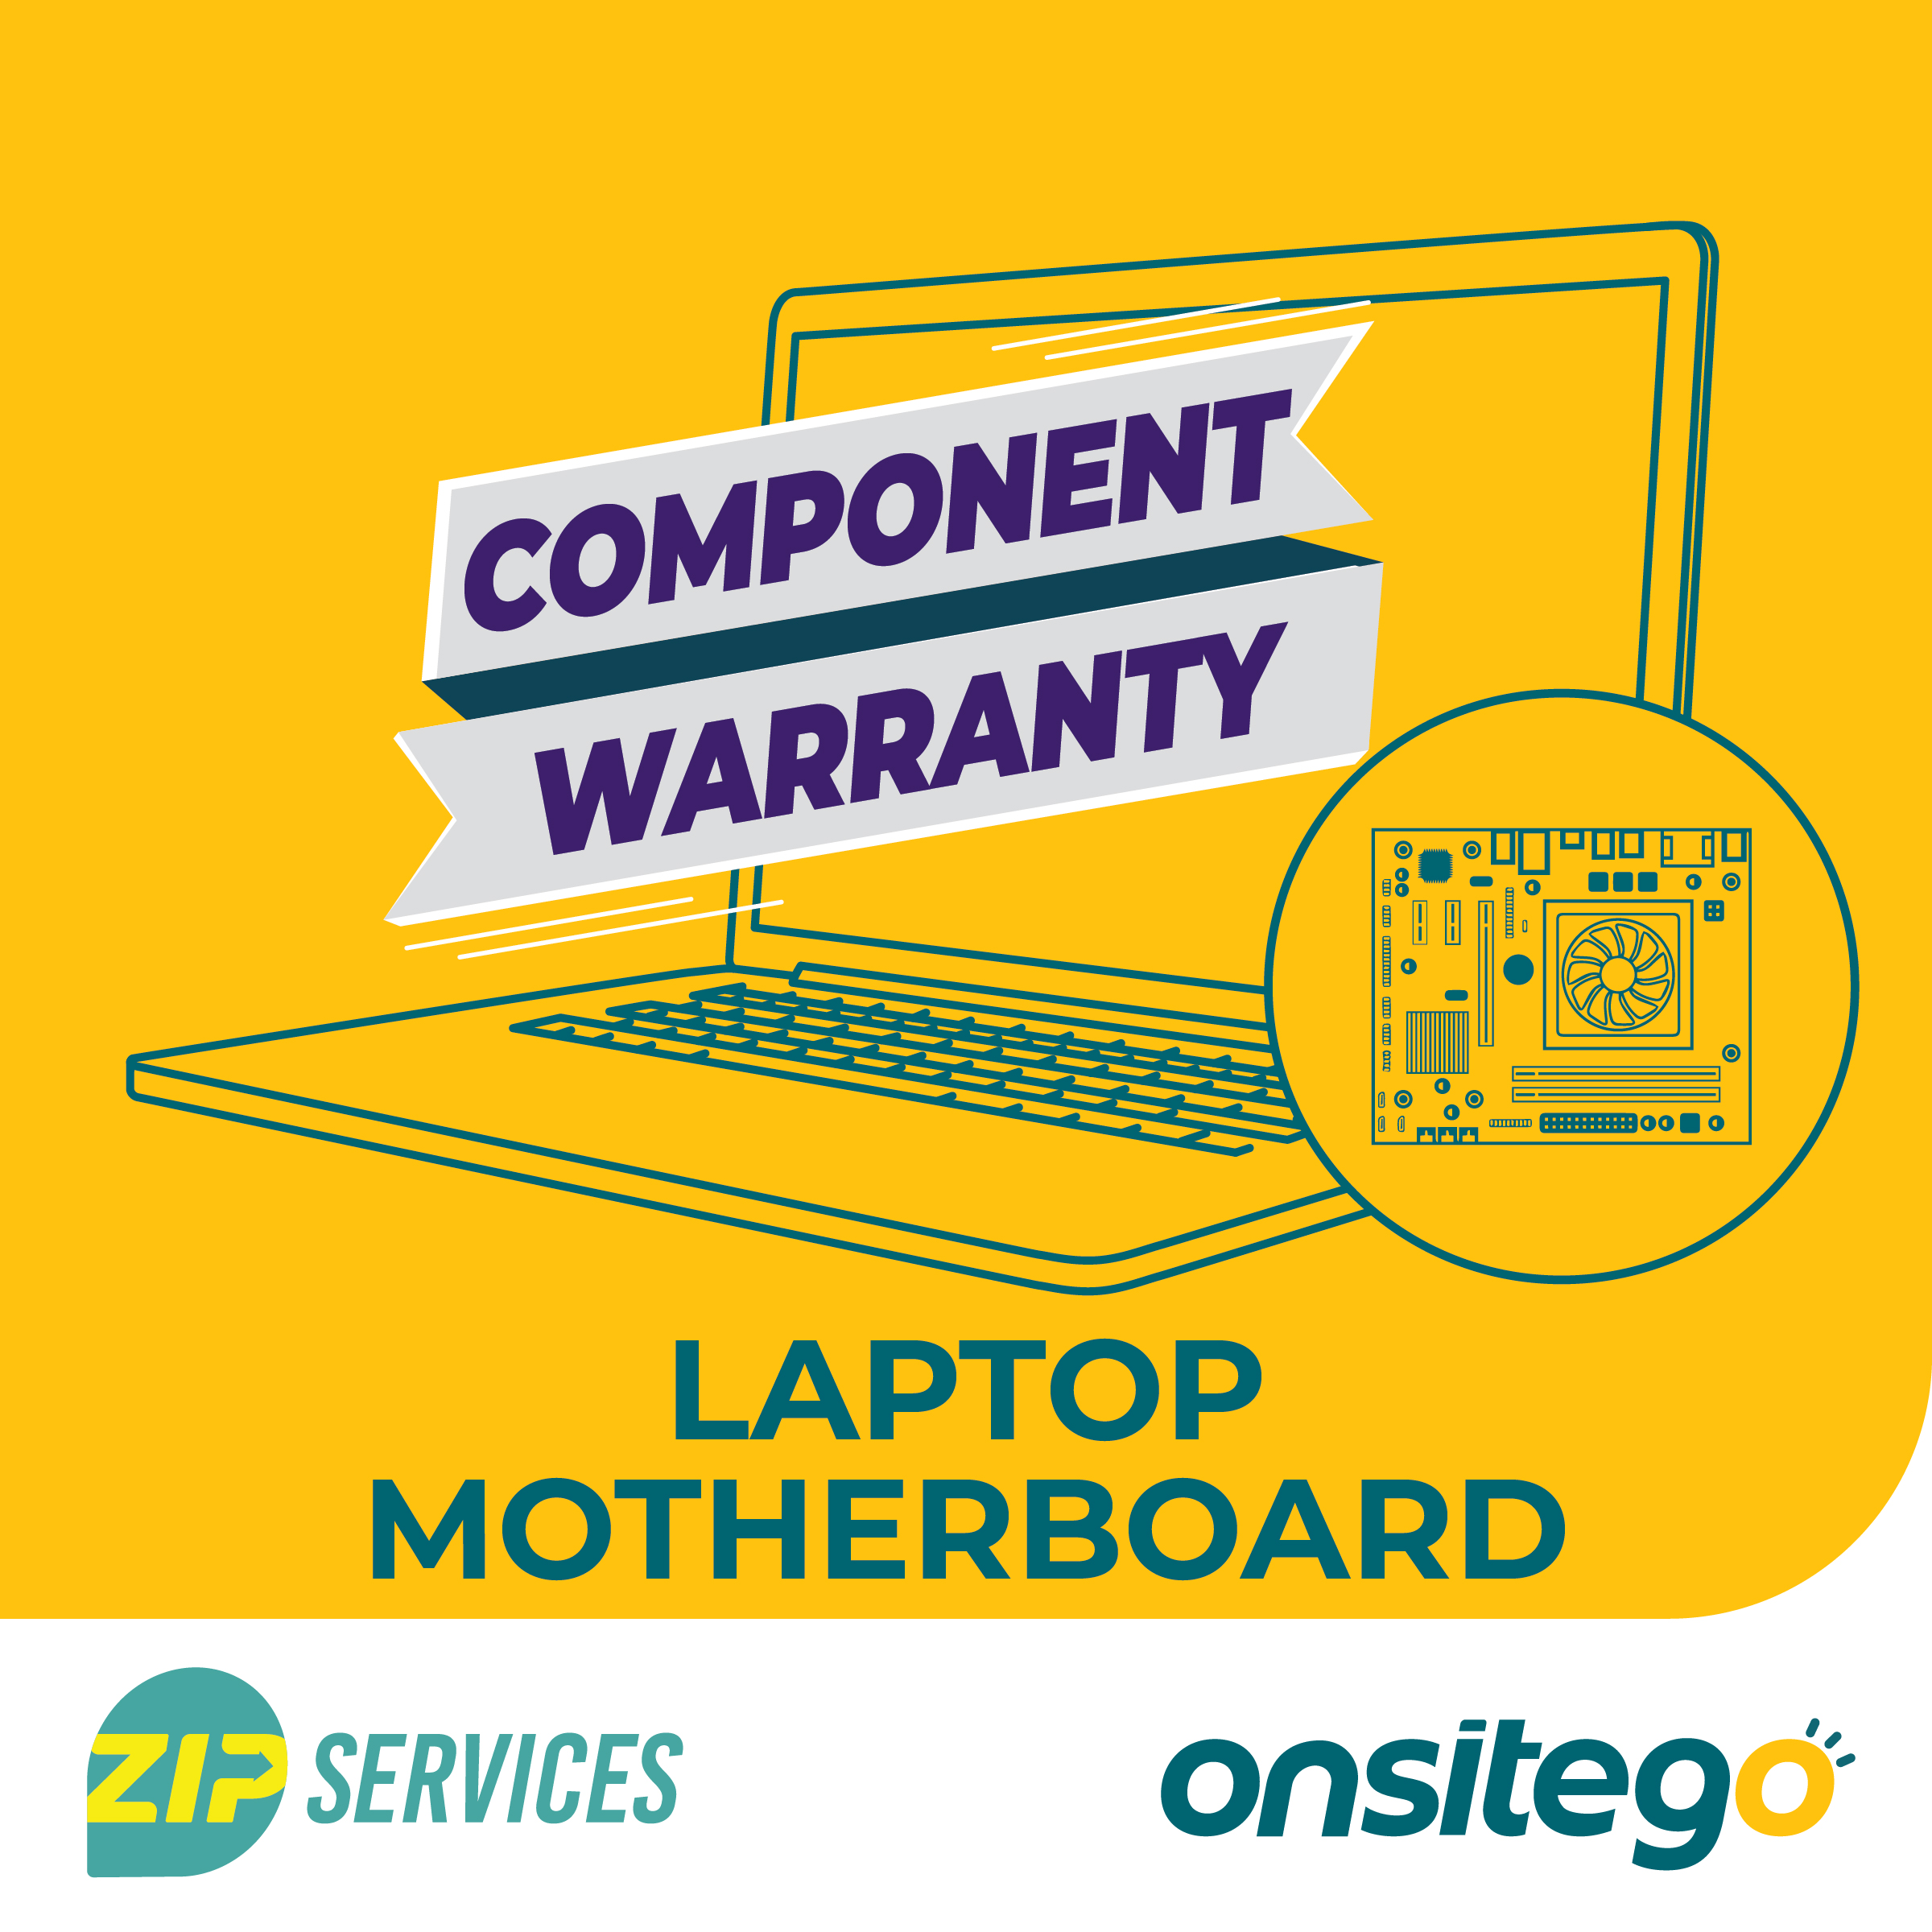 OnsiteGo 1 Year Extended Warranty for Motherboard Rs. 1500000 - Rs.200000_1